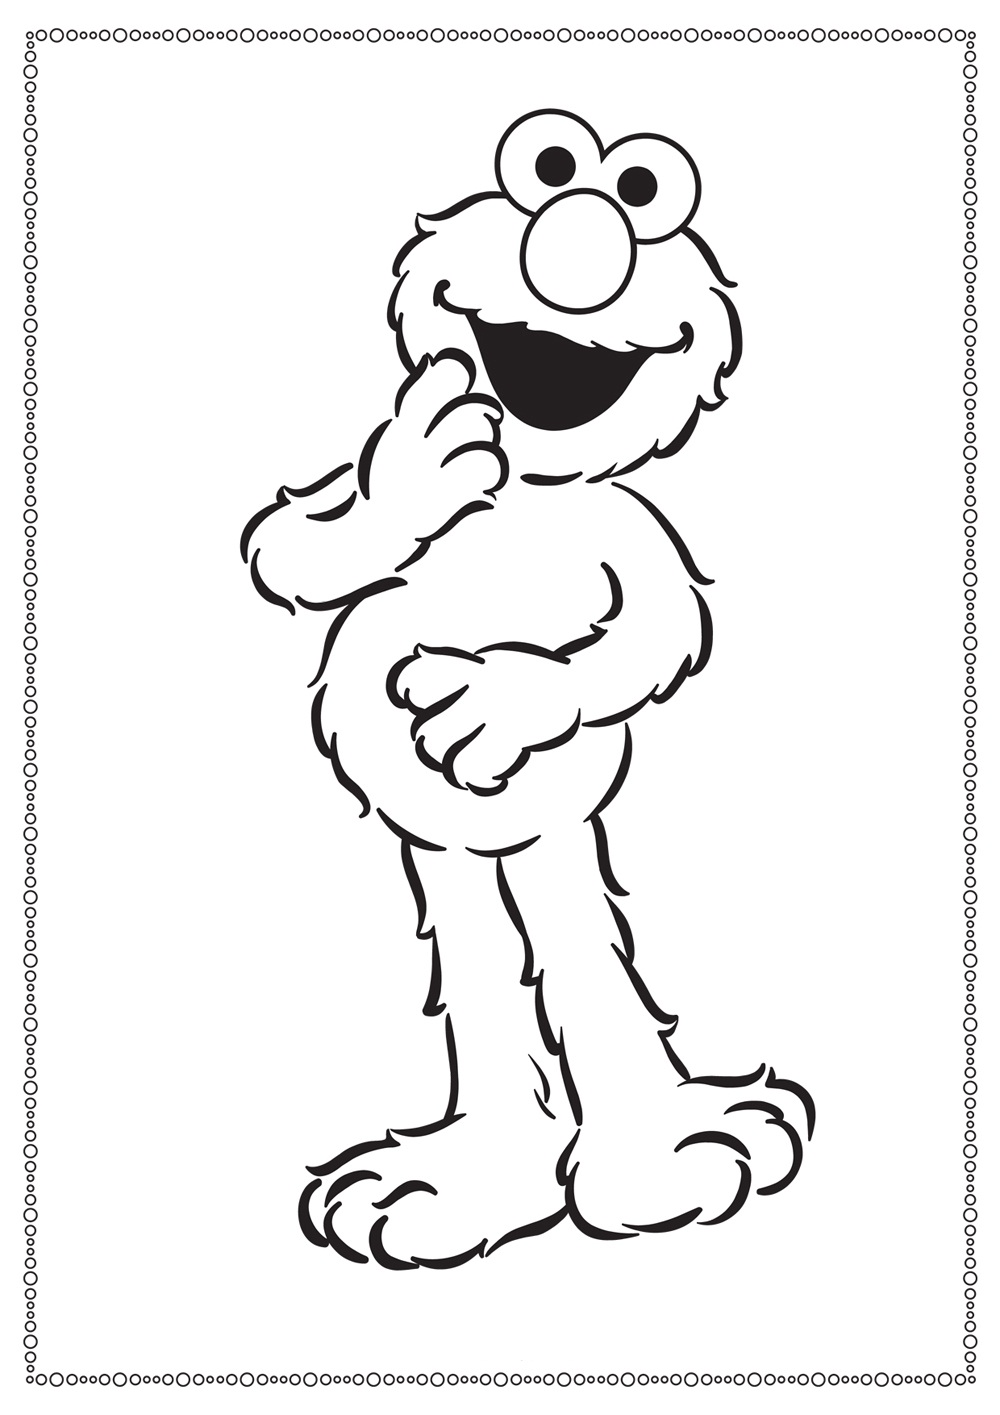 Free Printable Elmo Coloring Pages For Kids